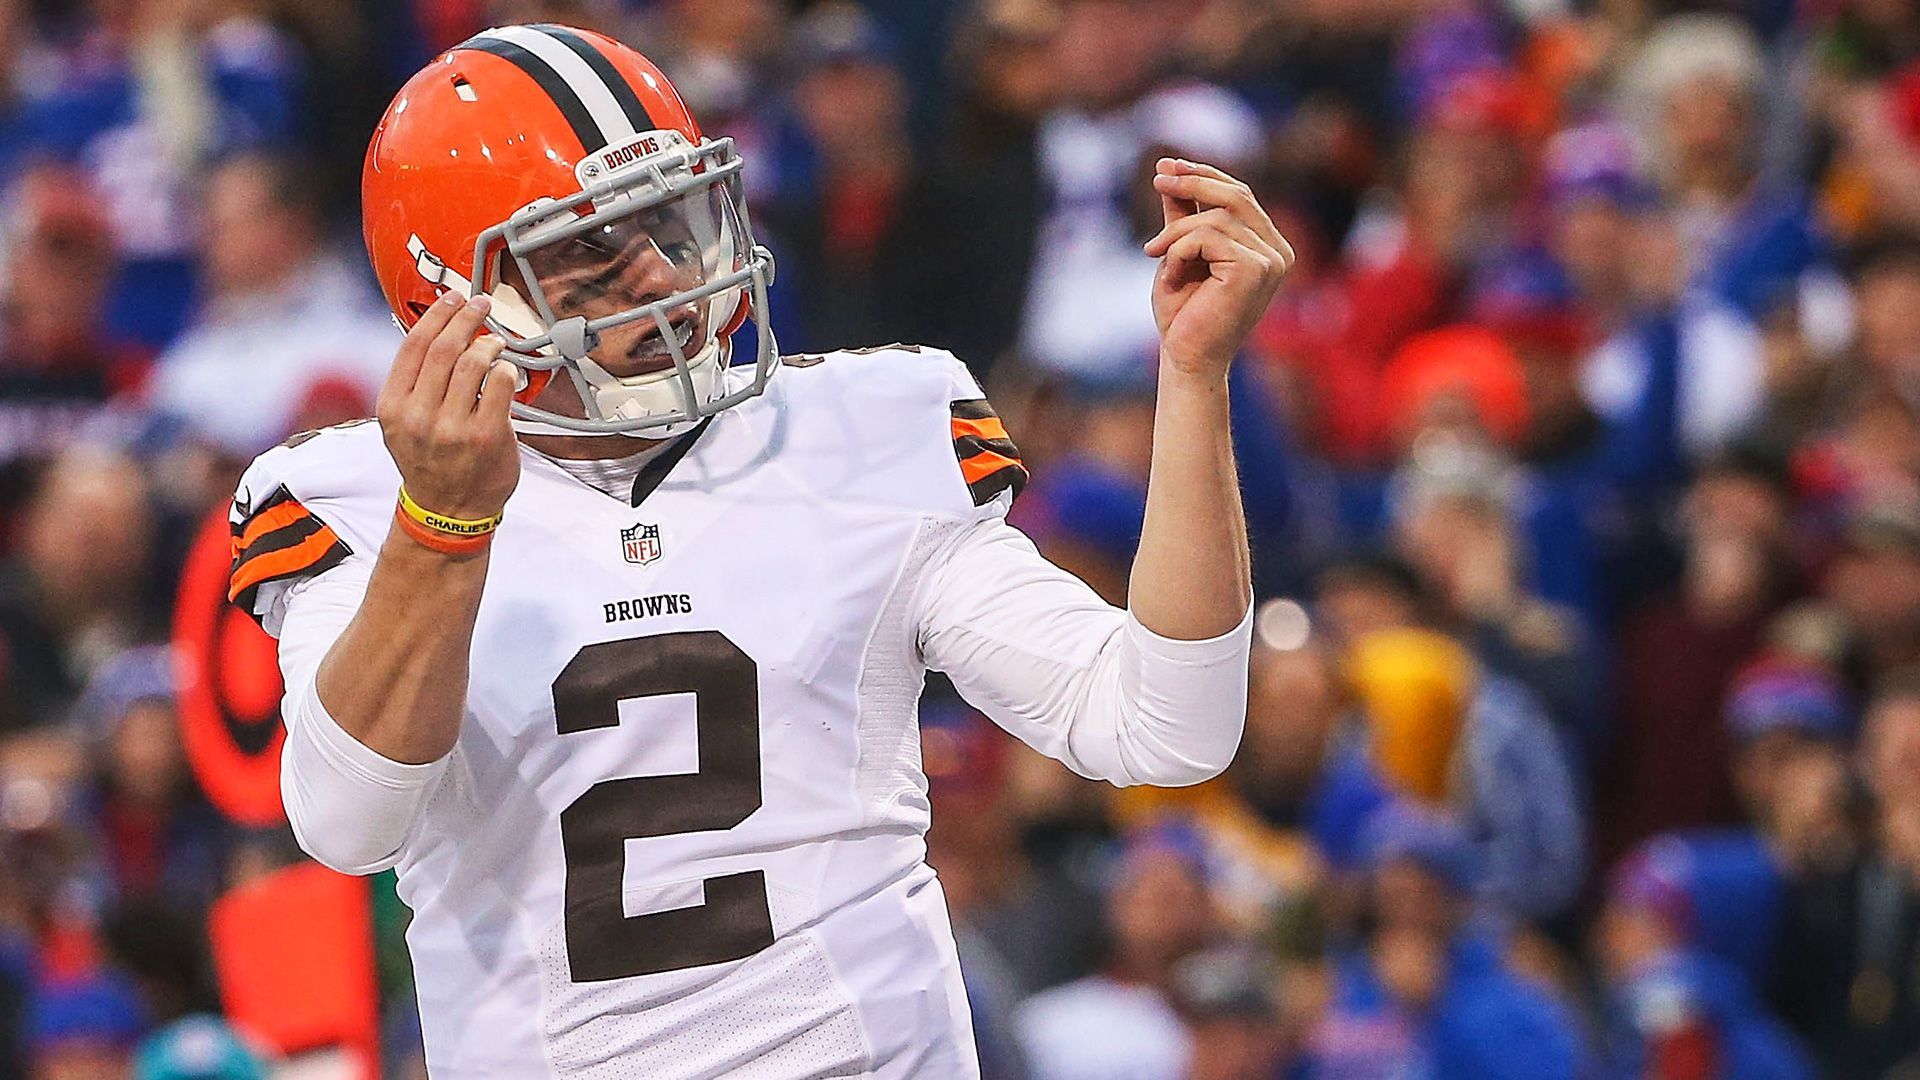 Johnny Manziel Wallpaper Image Photos Pictures Background